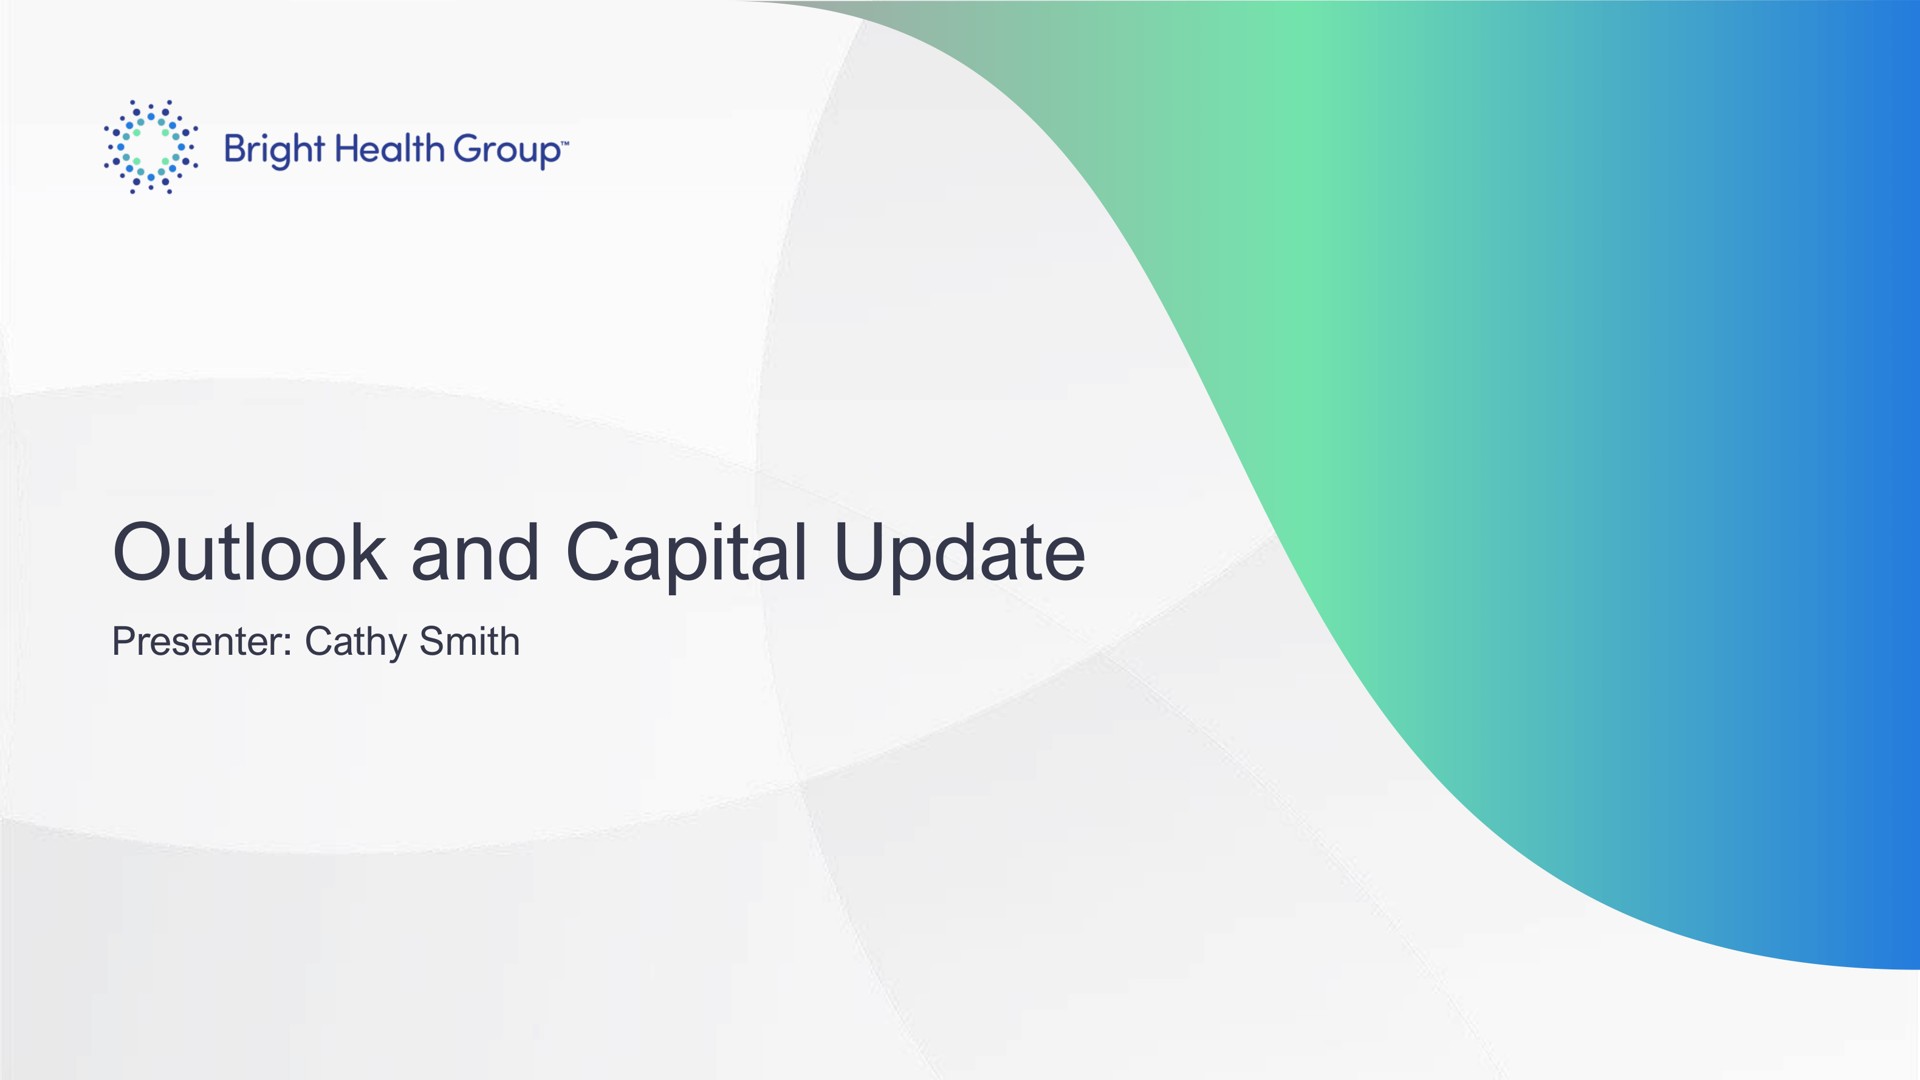 outlook and capital update presenter smith | Bright Health Group